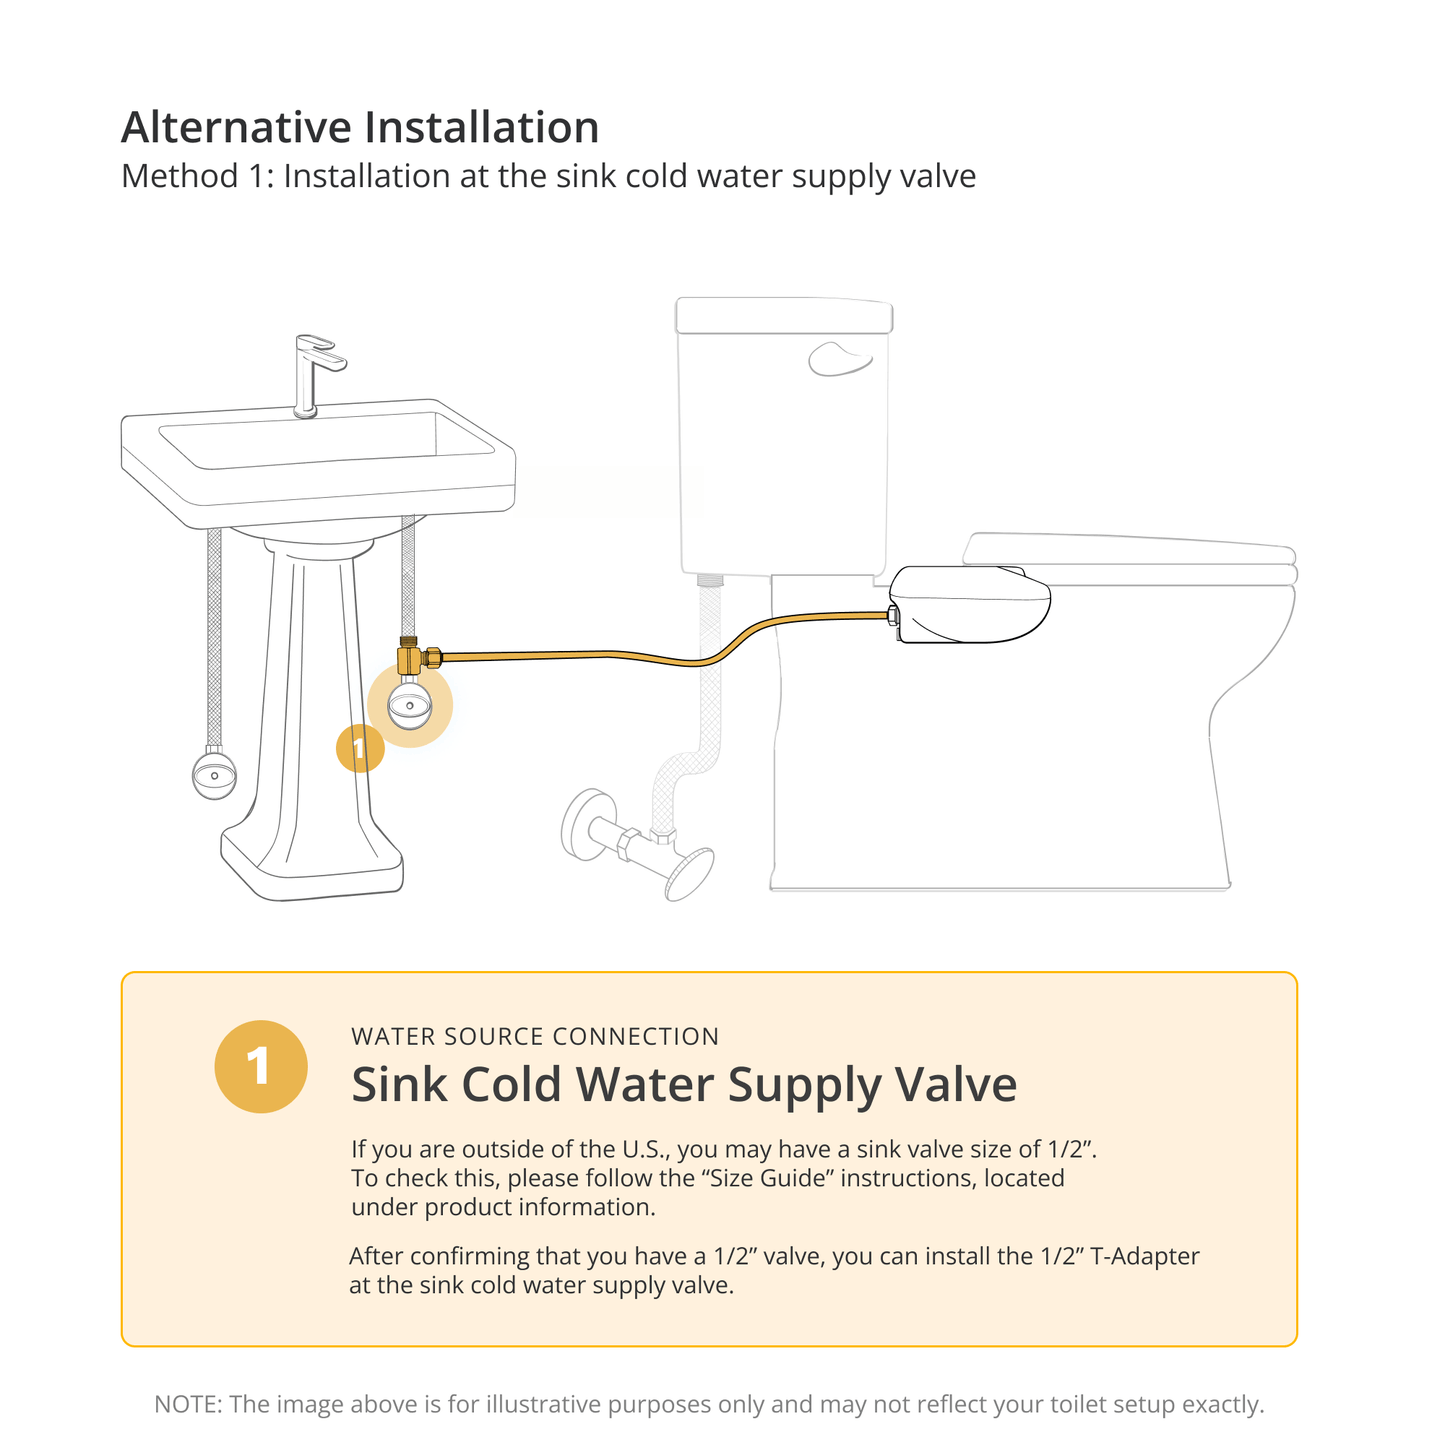 Alternative Installation Method 1: Installation at the sink cold water supply valve. You may use either water source.